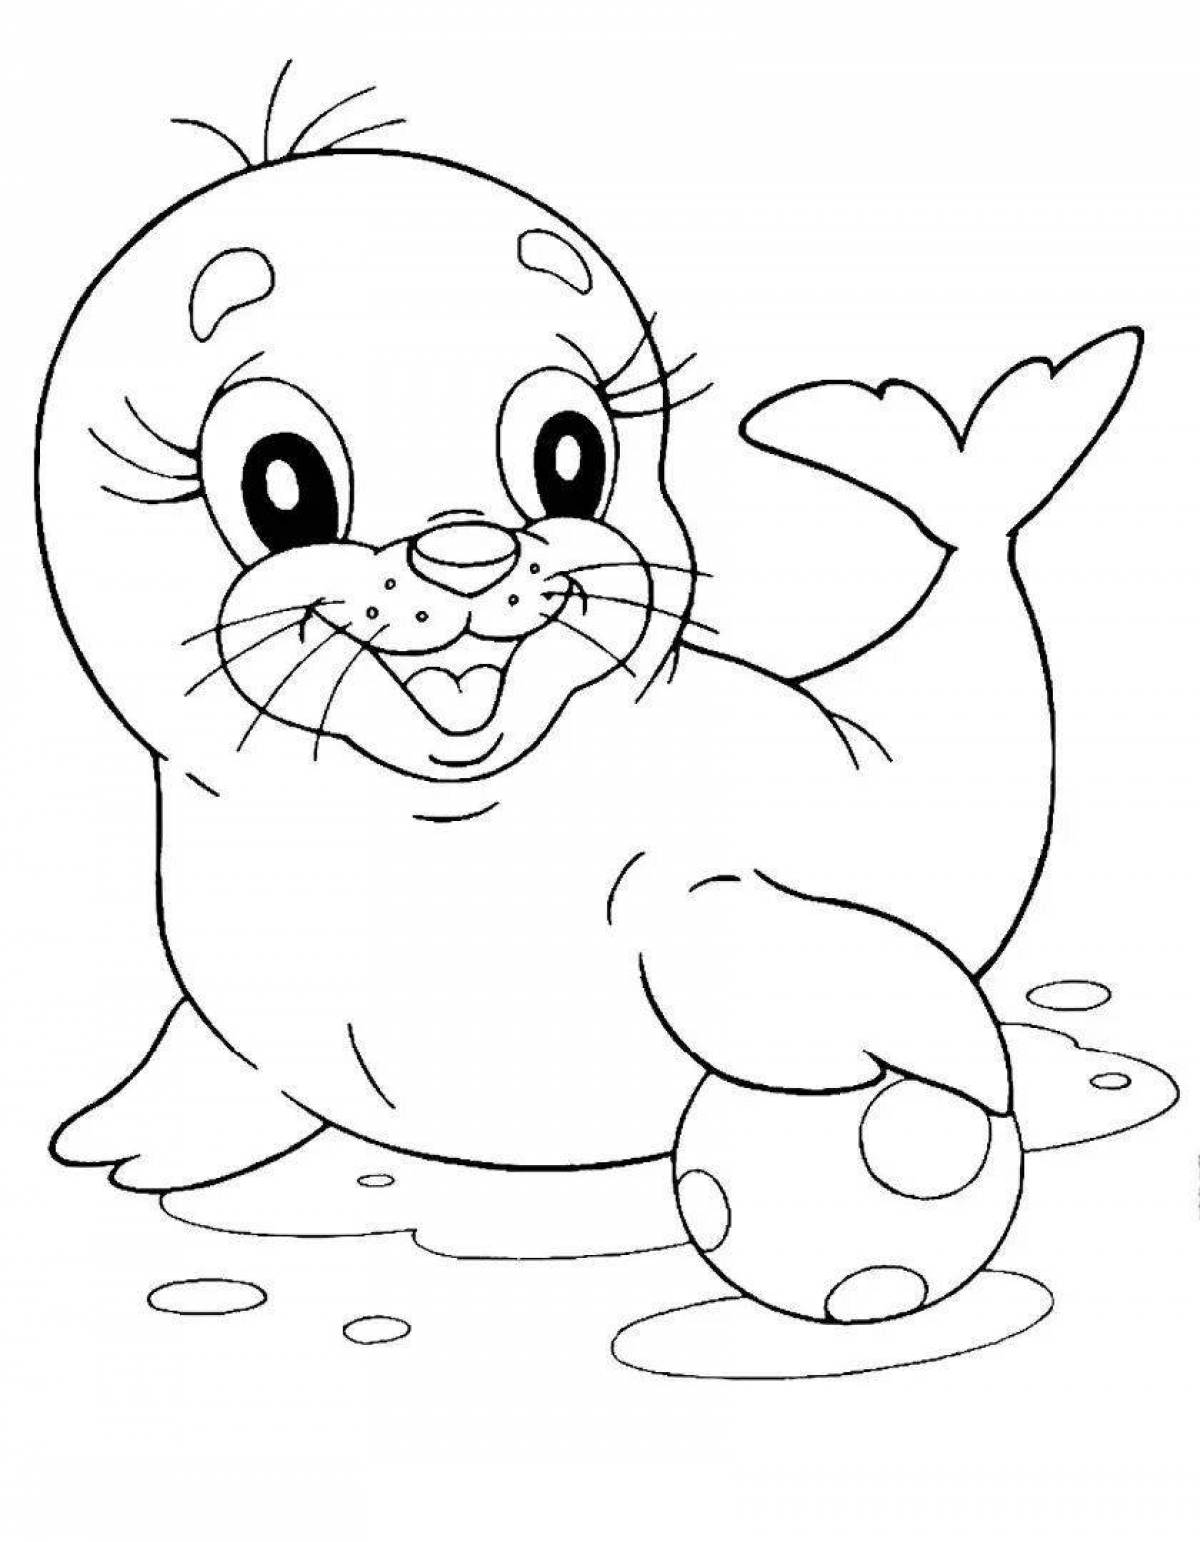 Seal for kids #4